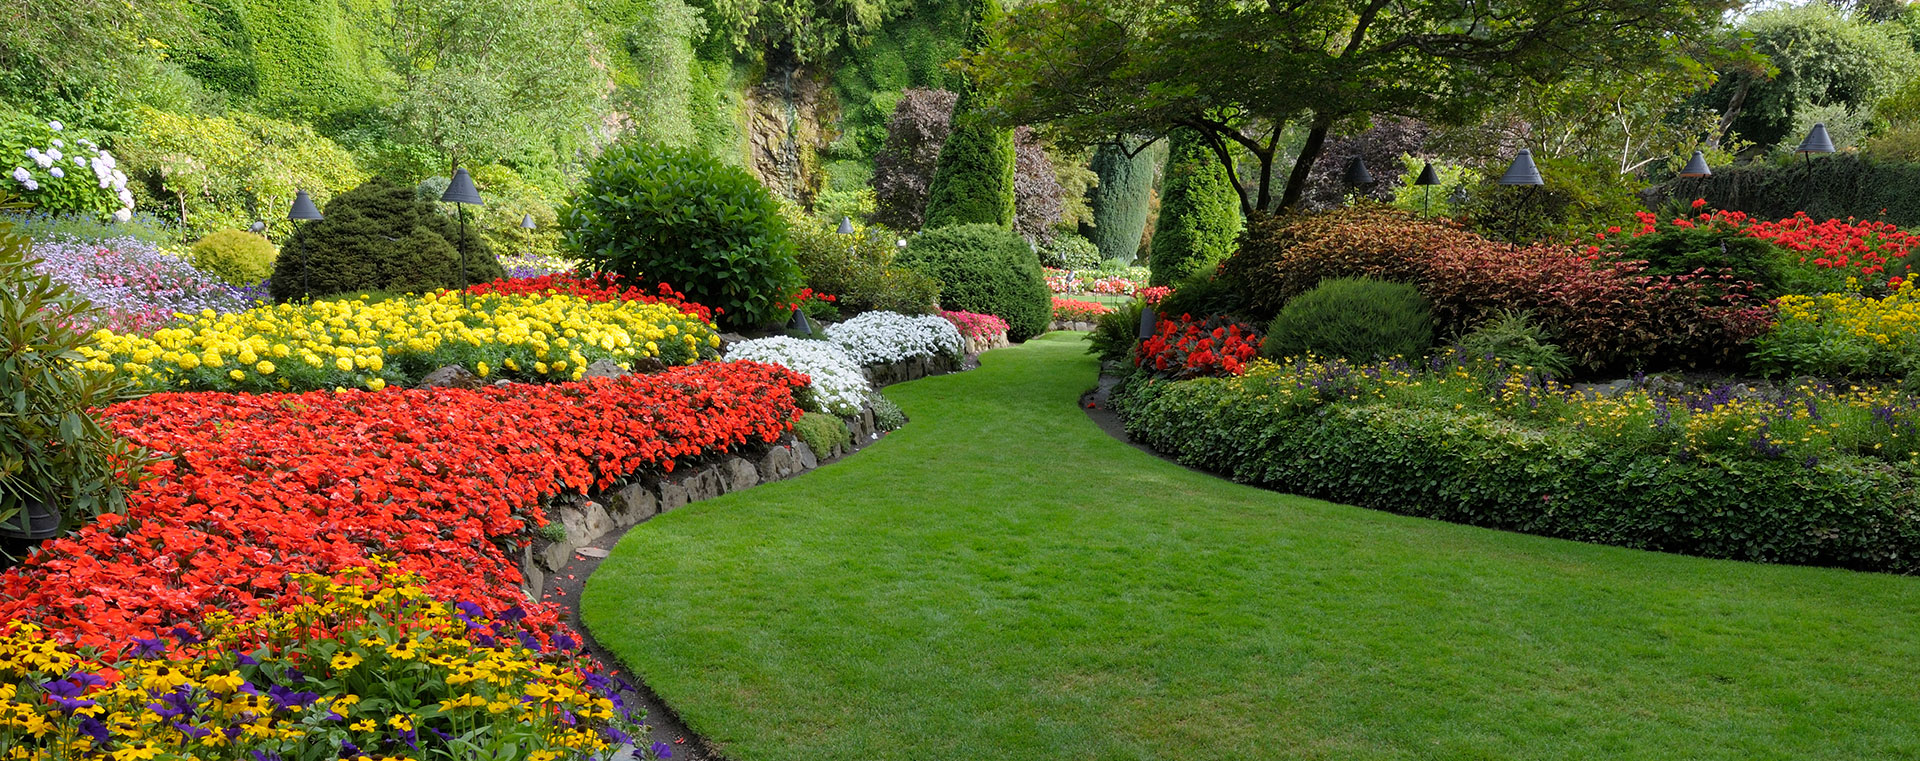 lawn maintenance,  grass cutting and garden clean up in  toronto